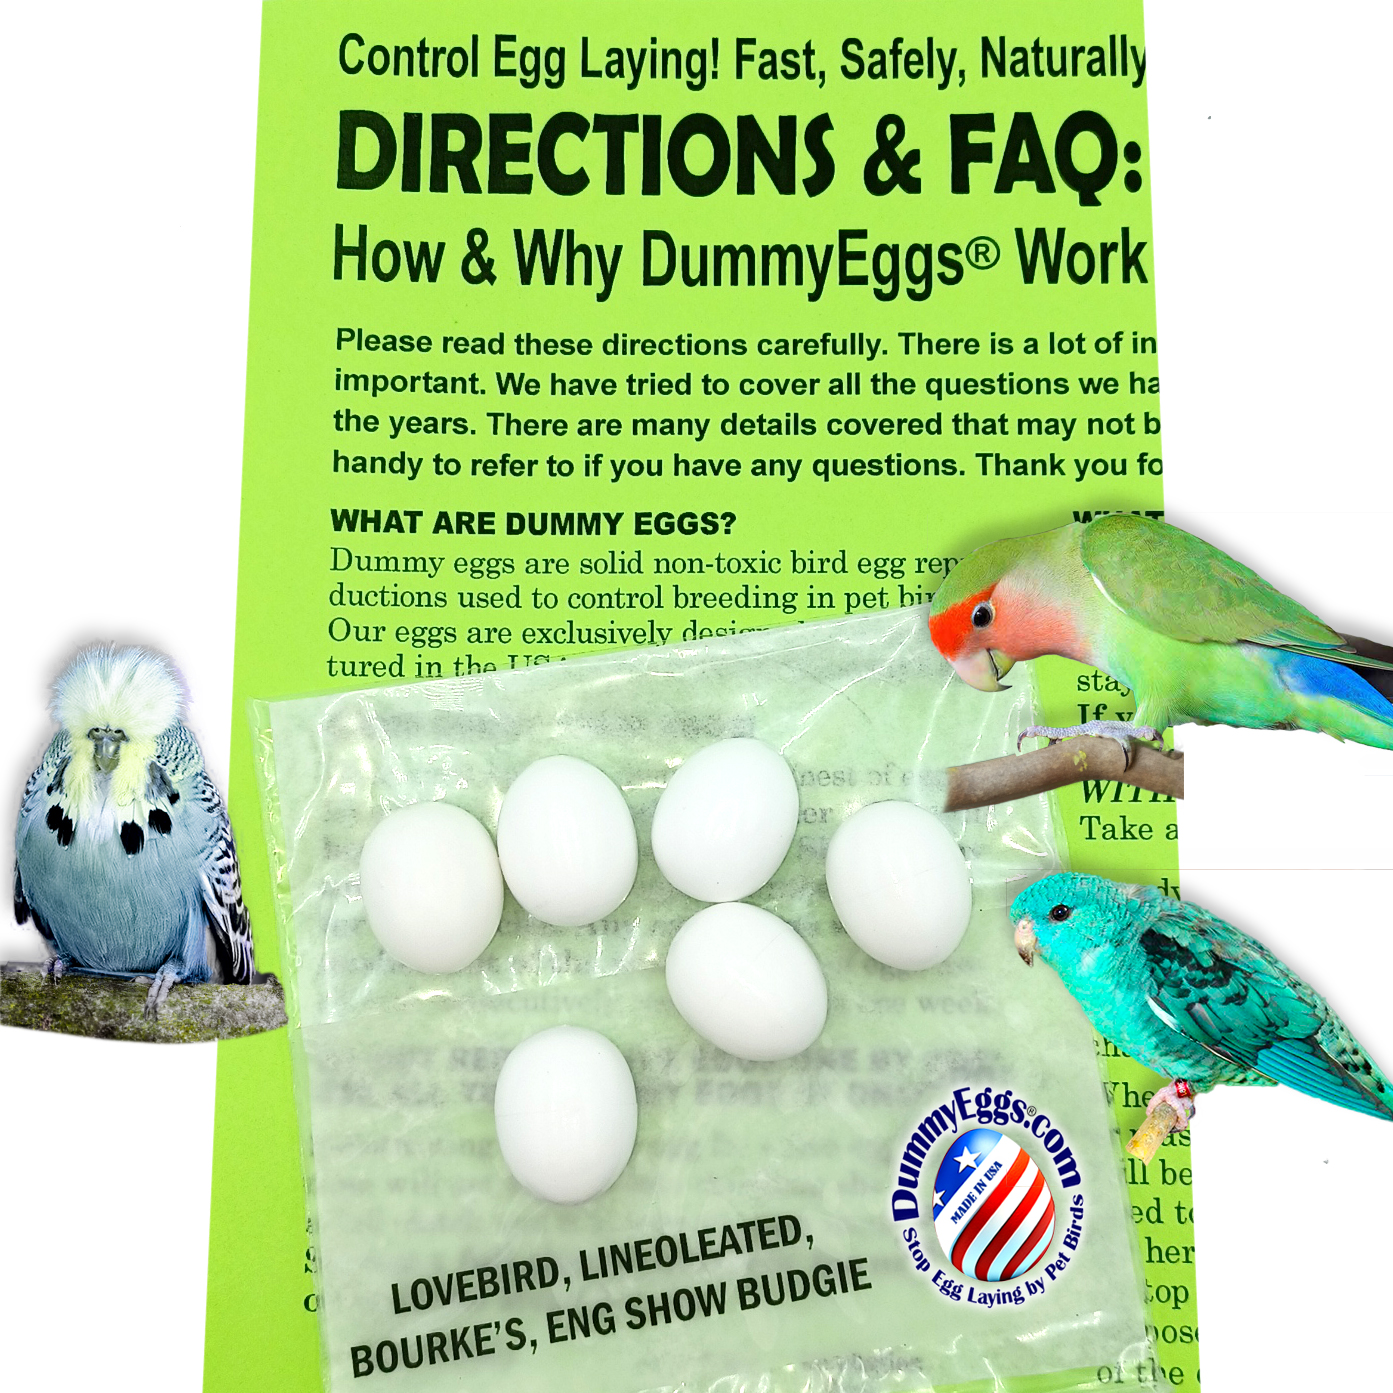 DummyEggs® for LOVEBIRD, LINEOLEATED & BOURKE'S, ENGLISH SHOW BUDGIES